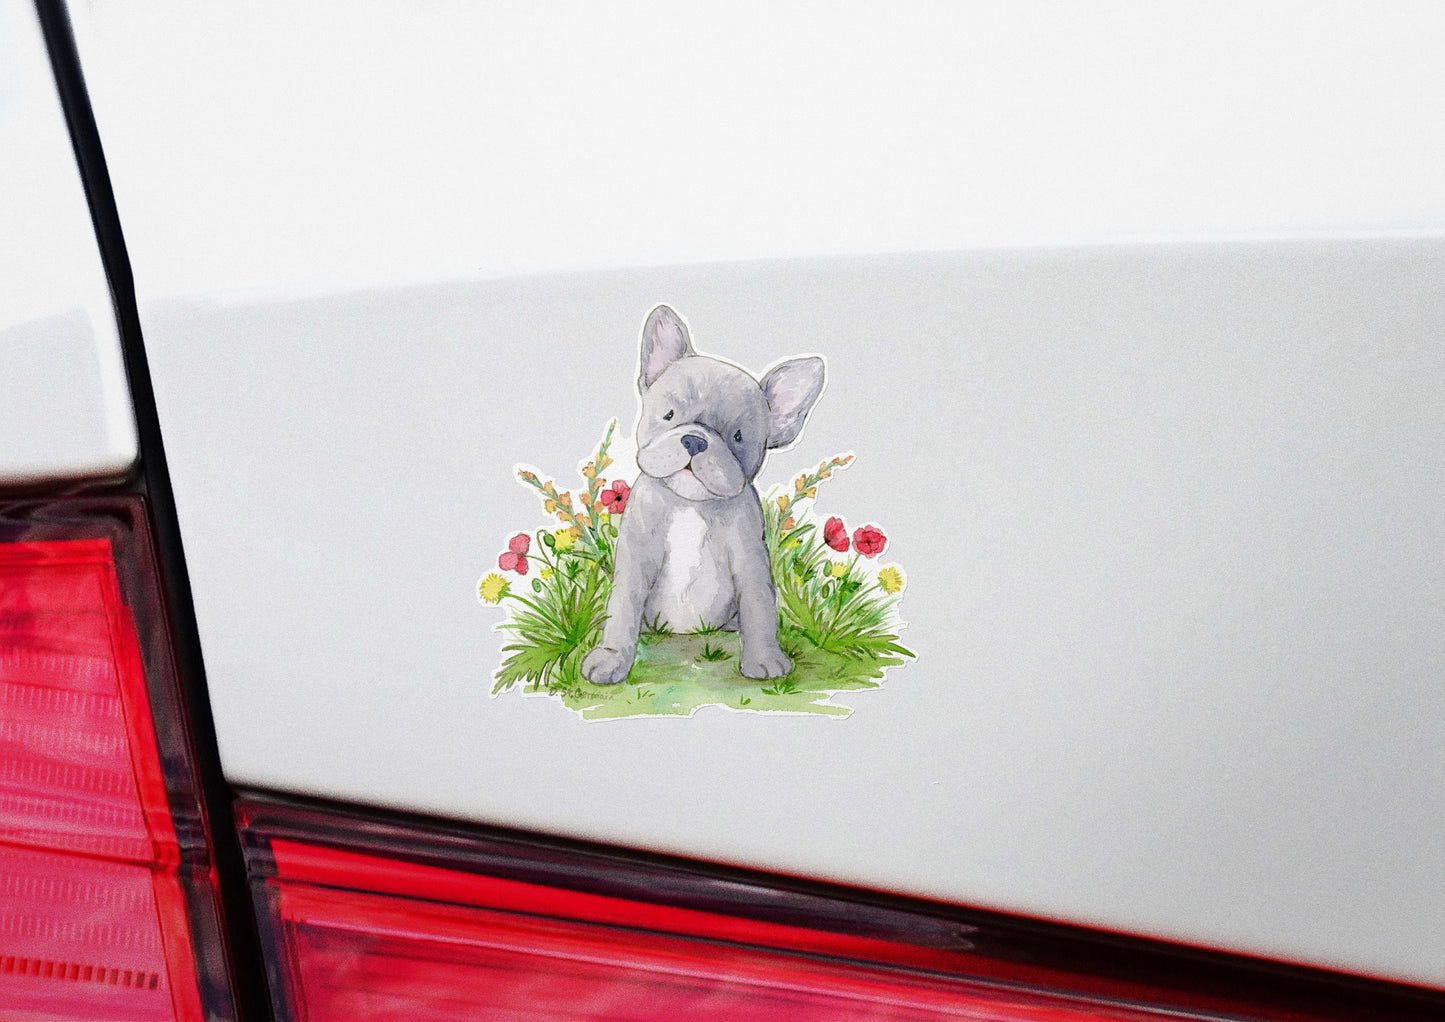 French Bulldog Sticker, Frenchie Car decal, Cute Frenchie Sticker, French Bulldog Gift Vinyl Dog Sticker, Waterproof Sticker, Dog Lover Gift